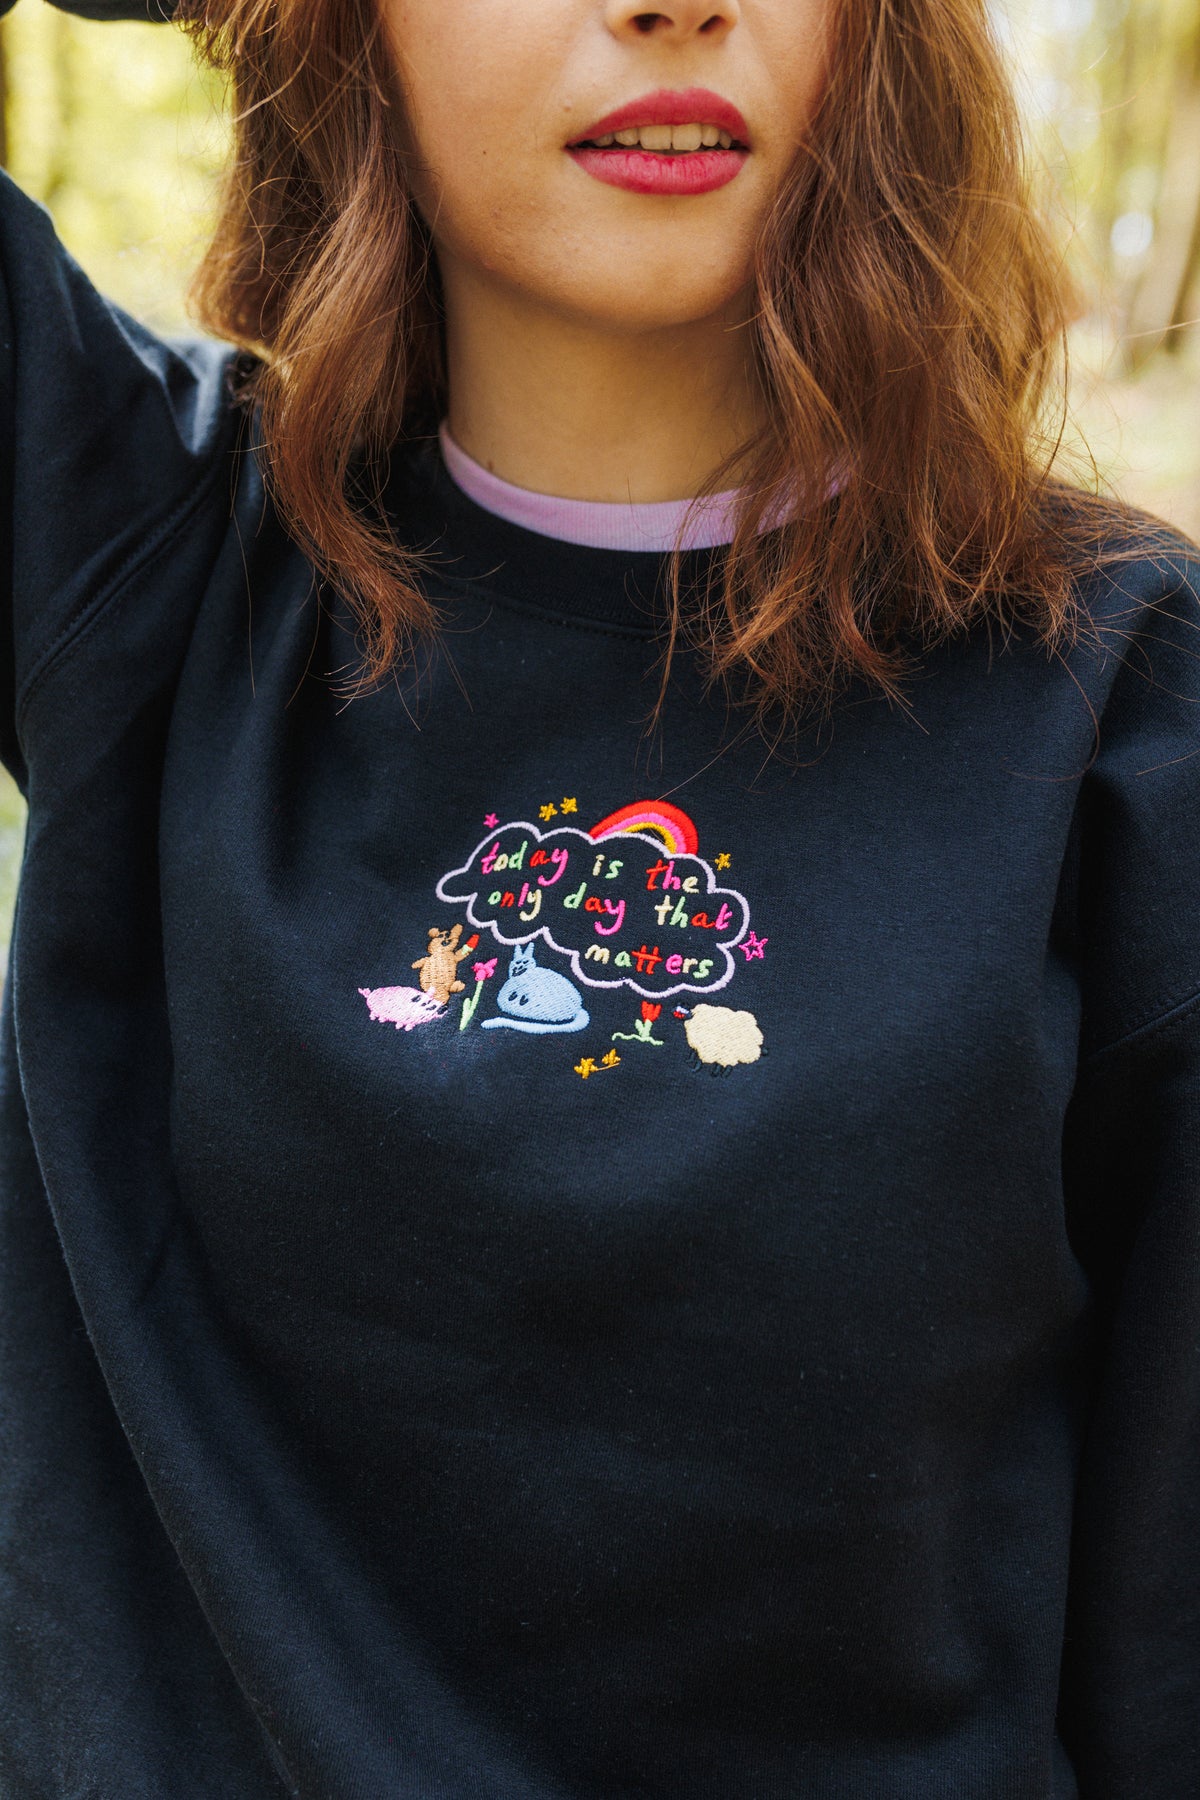 Only Today Matters Embroidered Sweatshirt